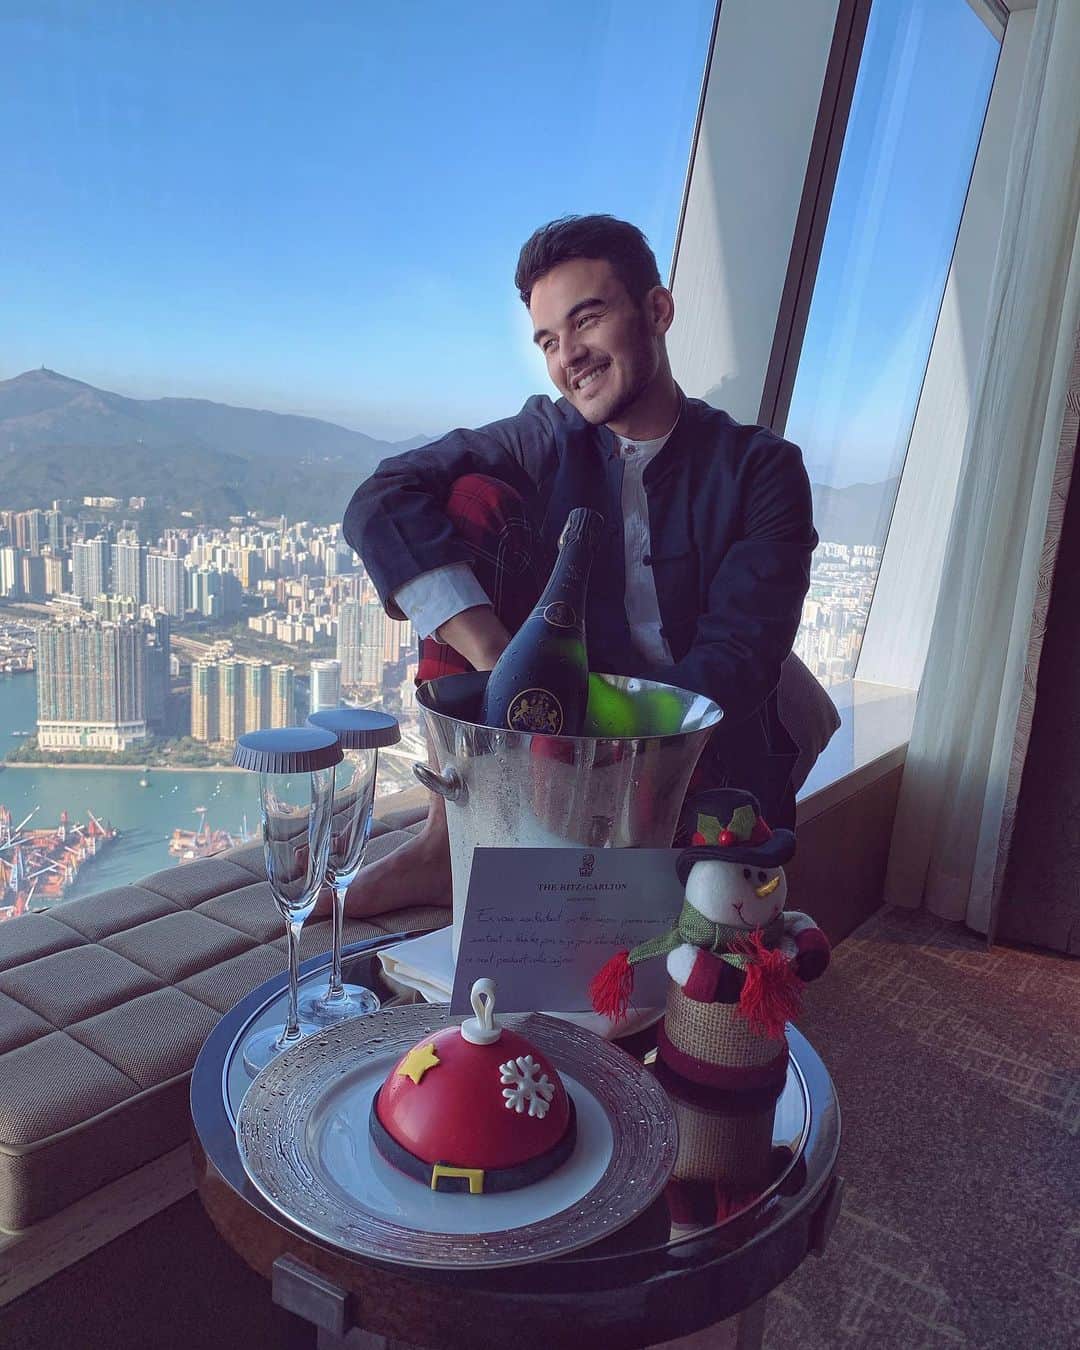 Kam Wai Suenのインスタグラム：「Lovely Christmas present from babe 🎄🎅🏻 Nice room on the 111th floor with an unobstructed view of our beautiful city Hong Kong and a top-notch service from the team of @ritzcarltonhongkong  #ritz #ritzcarltonhongkong #ritzcarltonhk #christmasdecor #christmasgifts #christmasstaycation #staycationhk #christmascake #christmascookies #lifestyleblogger #hkkol #hkinfluencer」